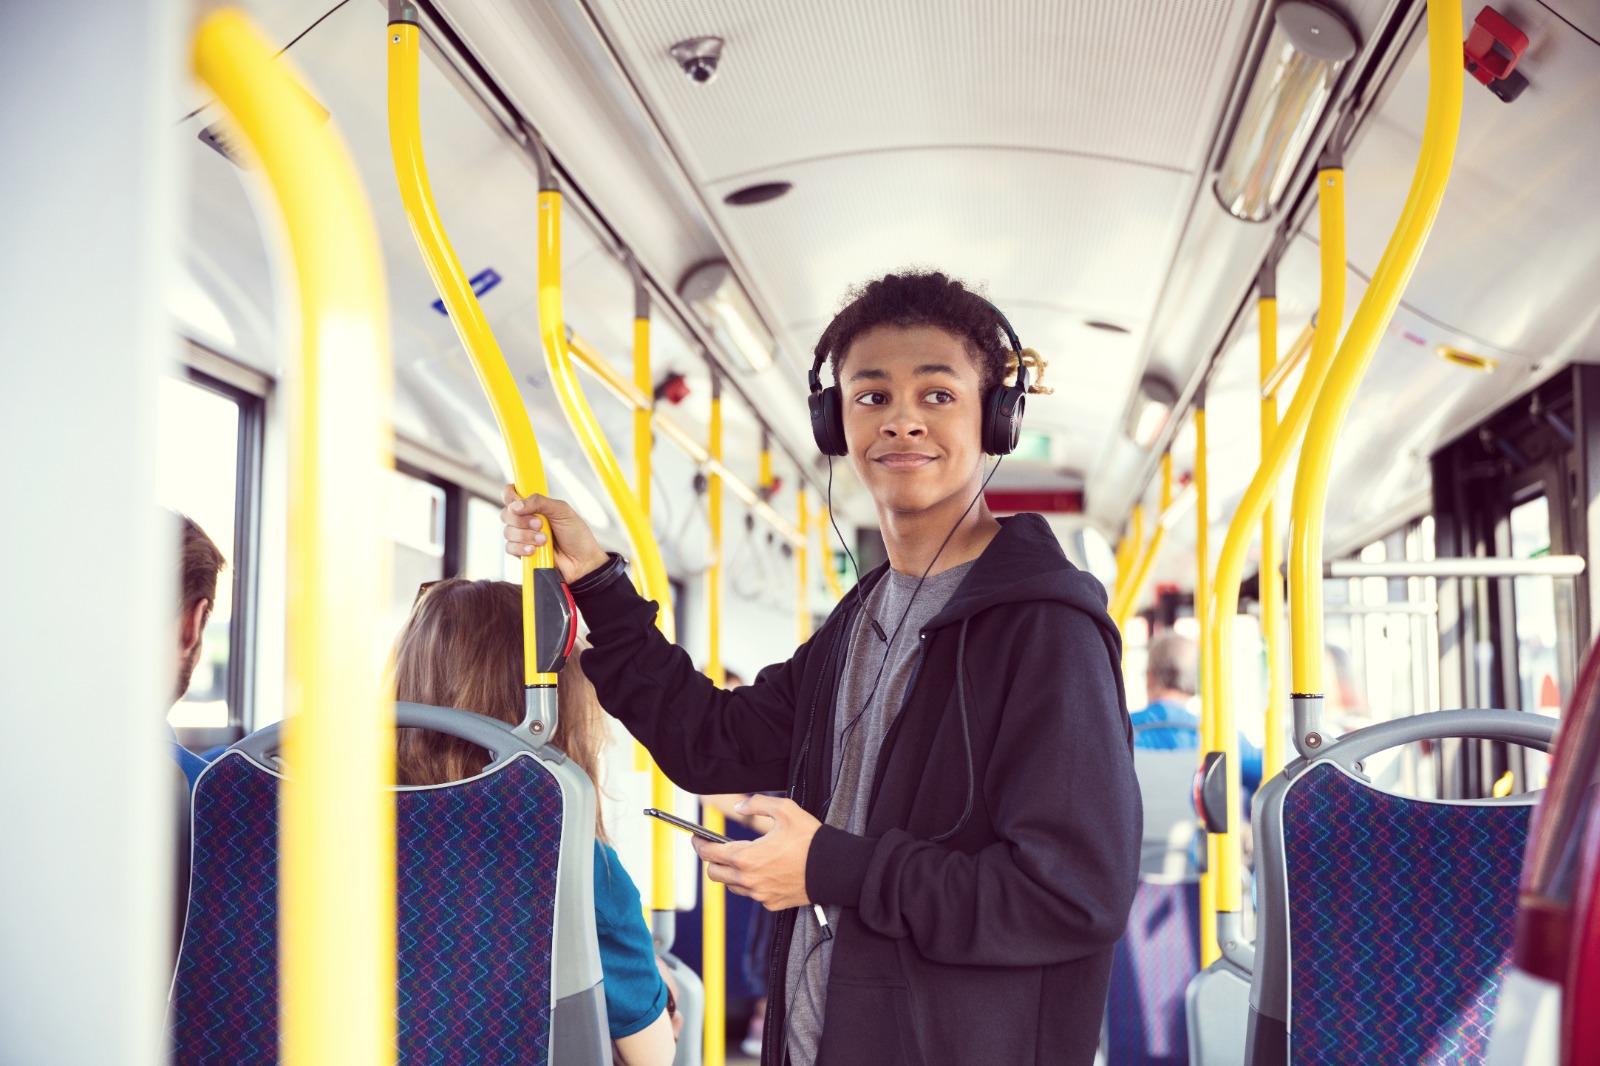 Person standing on a bus holding a phone, with headphones on. They are smiling.